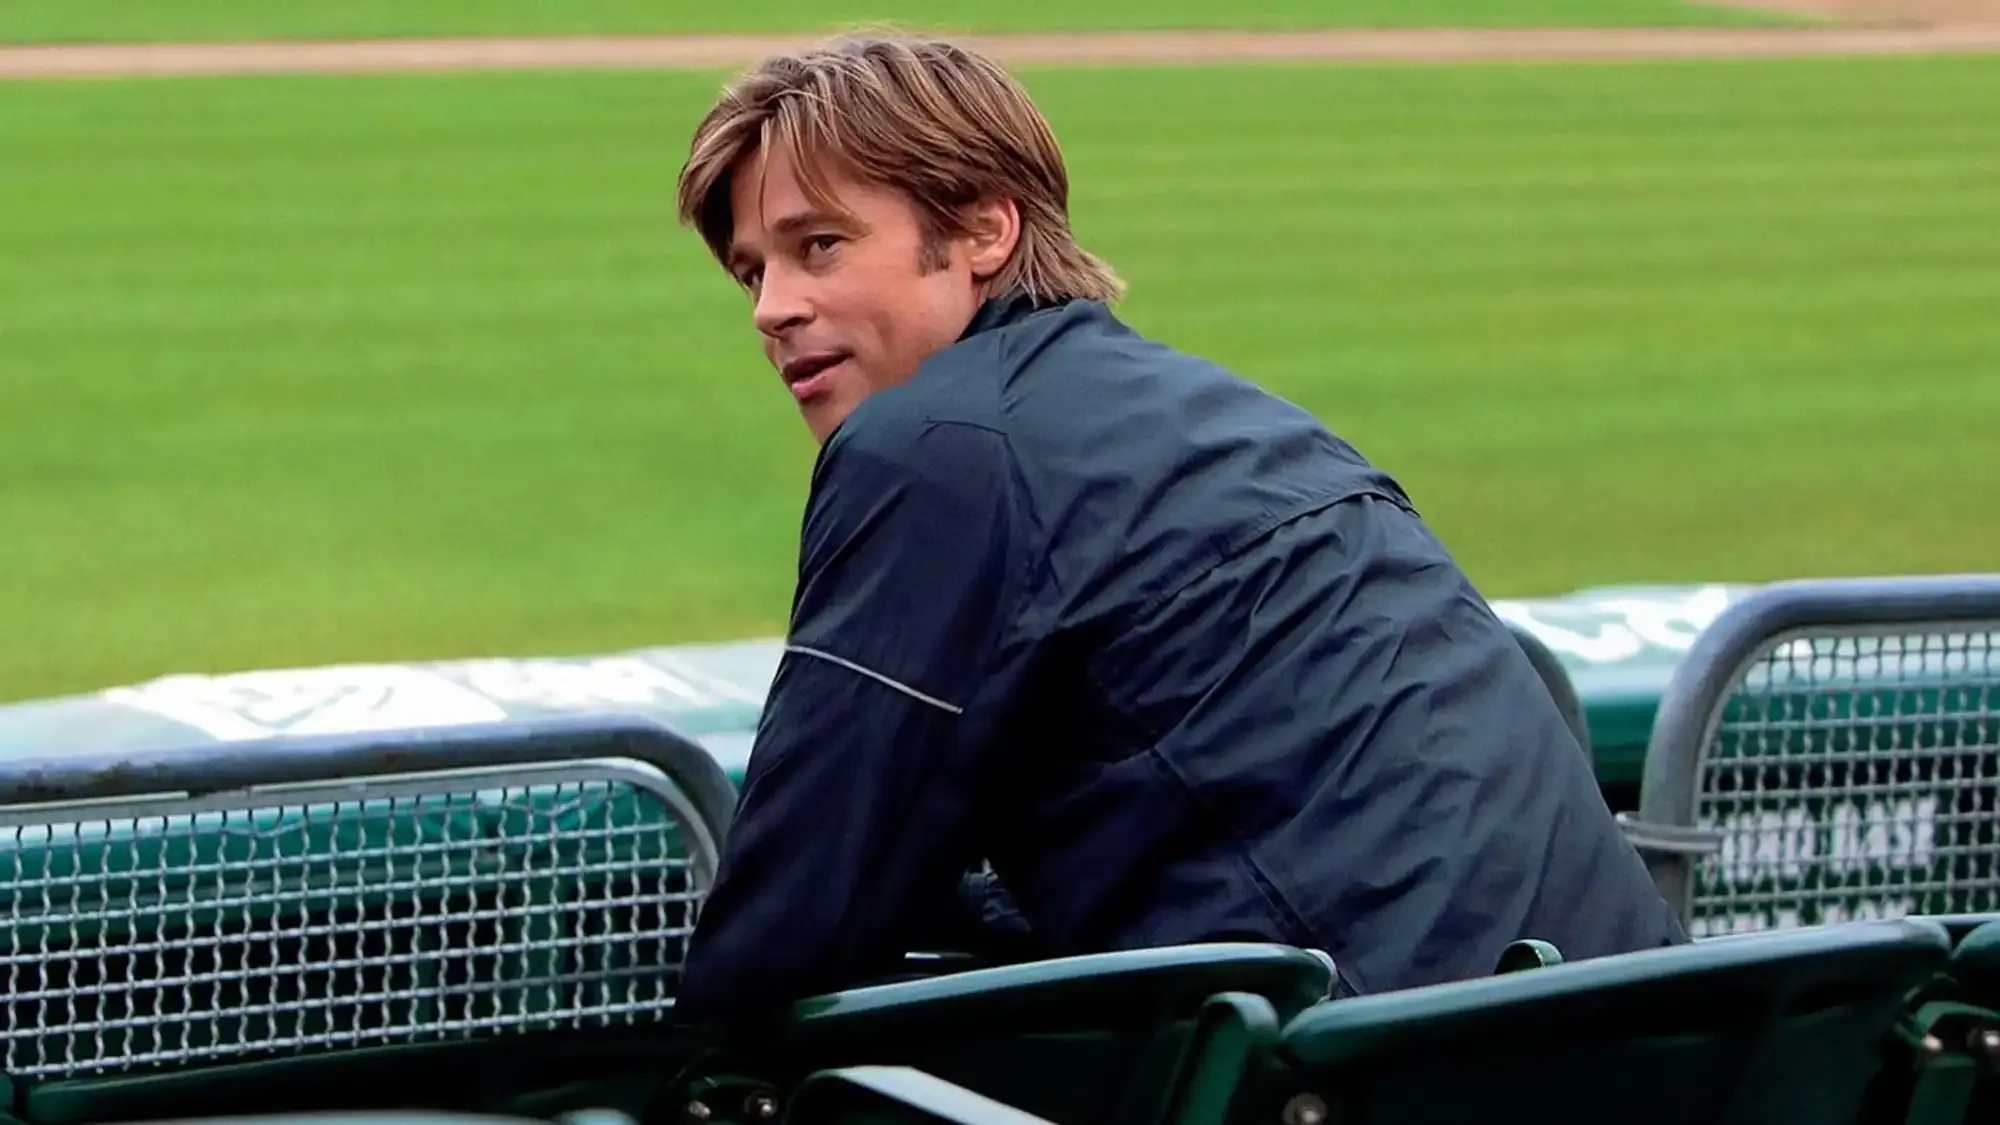 Moneyball movie review